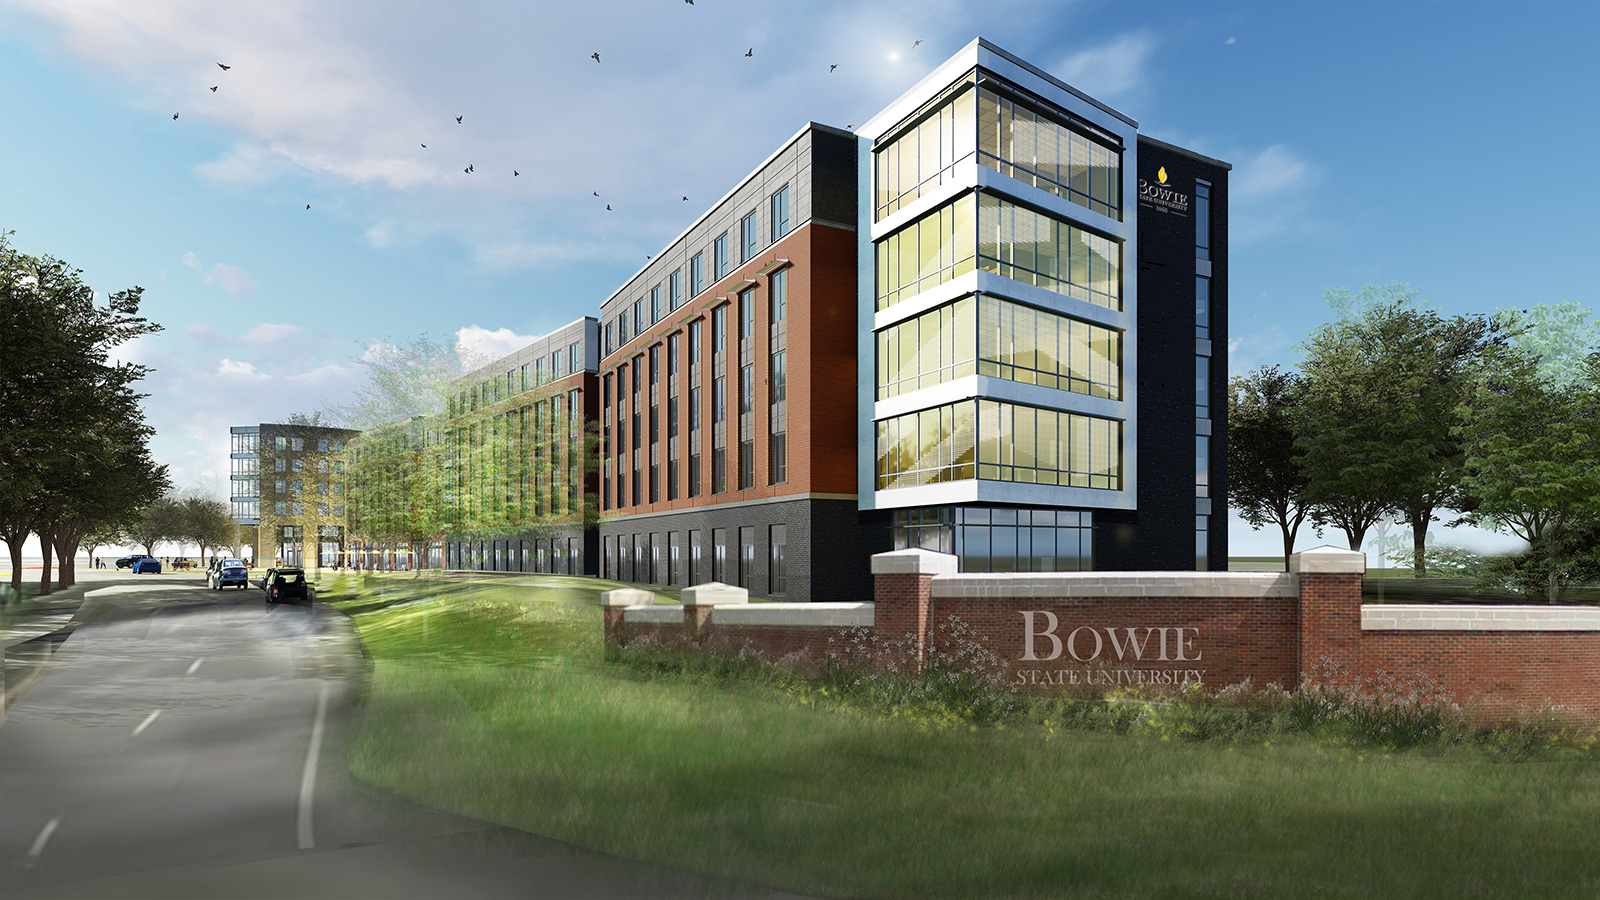 Balfour Beatty Campus Solutions to Develop MixedUse Student Housing